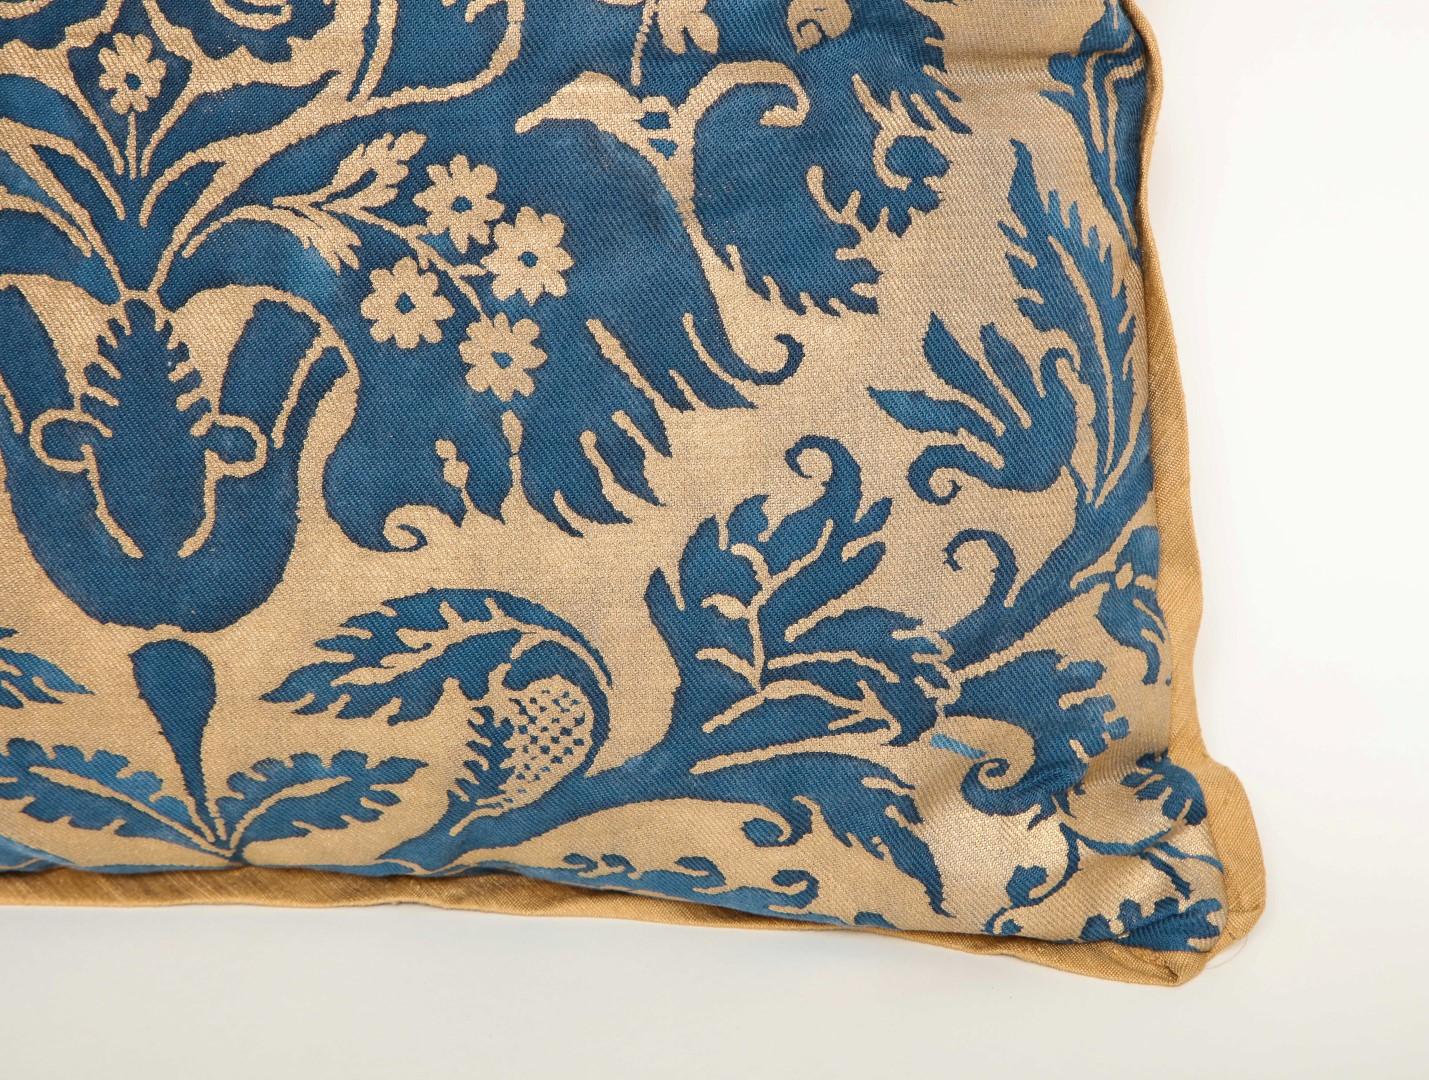 Cotton Fortuny Fabric Cushion in the DeMedici Pattern